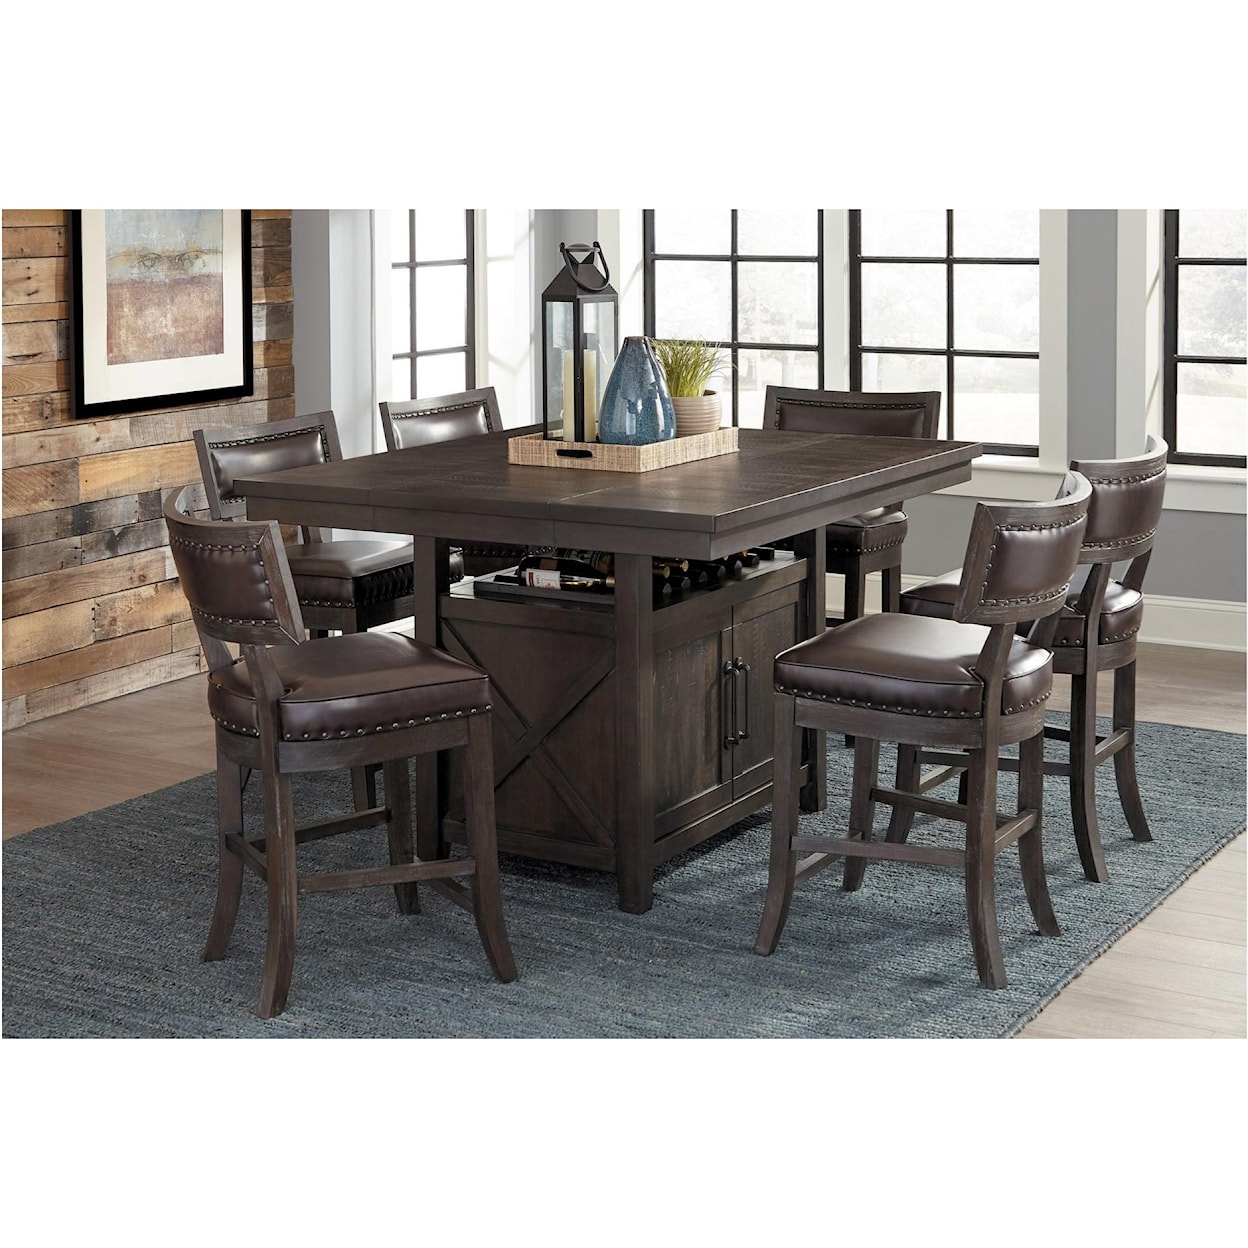 Homelegance Oxton Counter Height Table Set